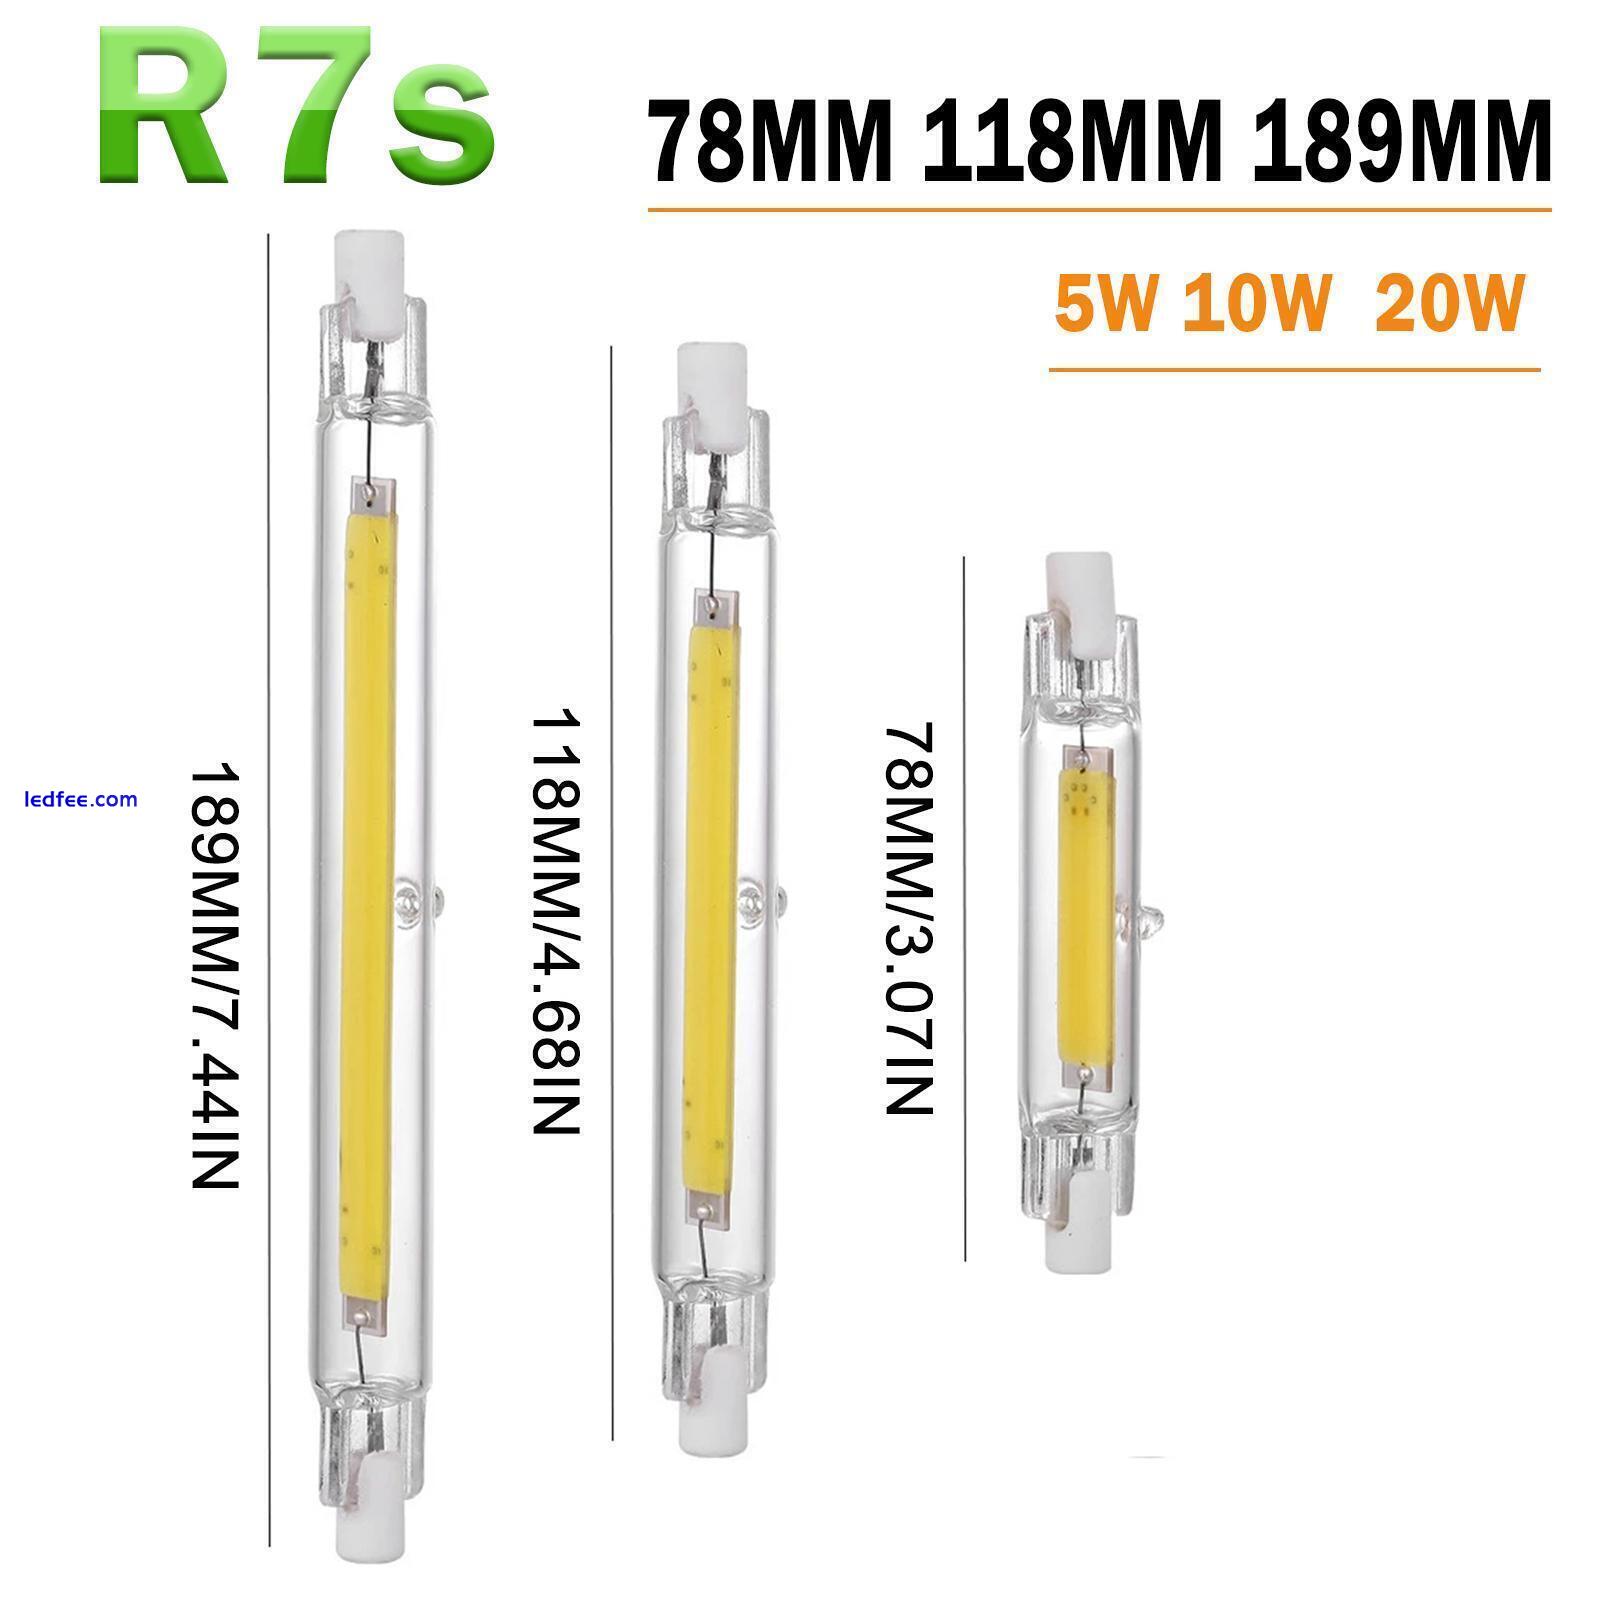 78mm 118mm Dimmable R7s COB LED Bulbs Security Flood Bulb 5W10W Replaces NEW 4 